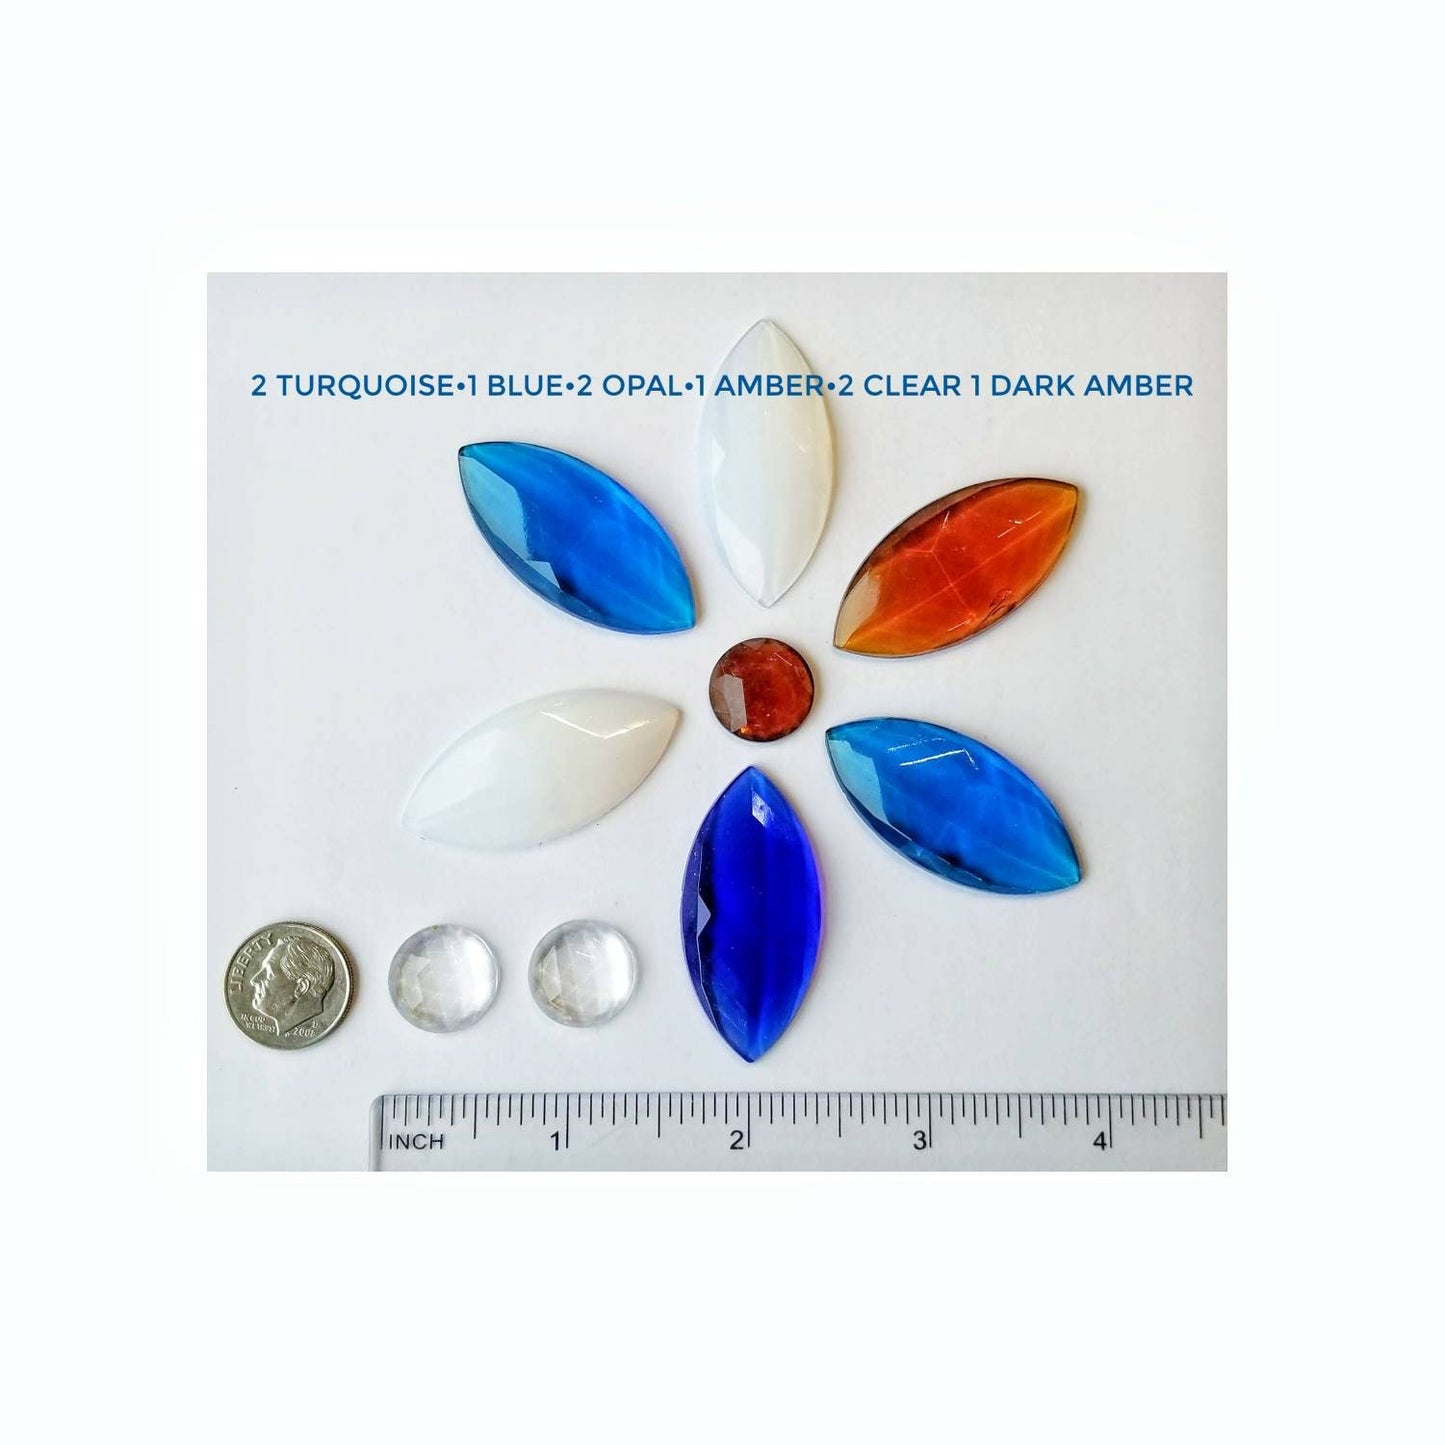 Jewels for Stained Glass, Vintage Faceted gems for copper foil or lead came projects, 9 total in assorted sizes Craft/Jewelry pendants